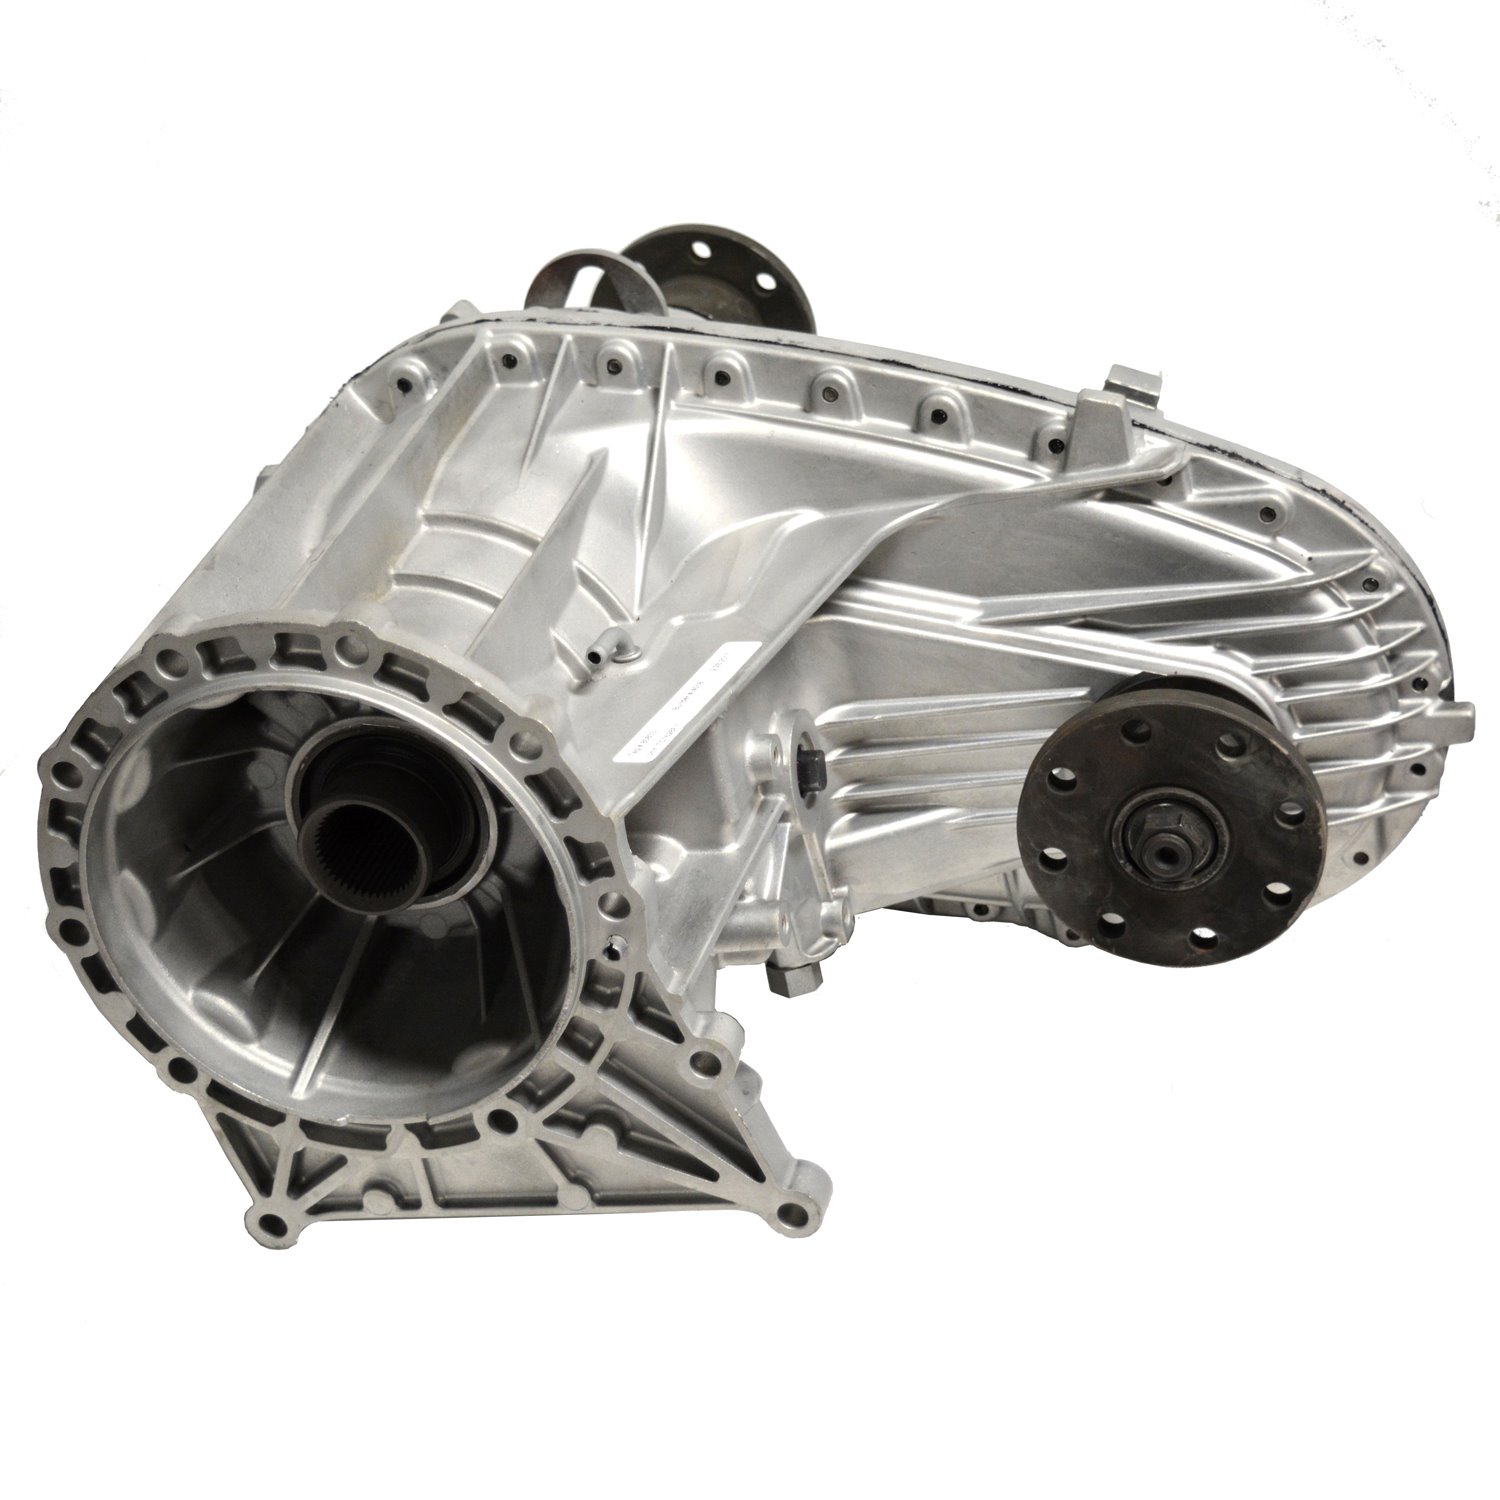 Remanufactured BW1628 Transfer Case for Ford 11-16 F250/